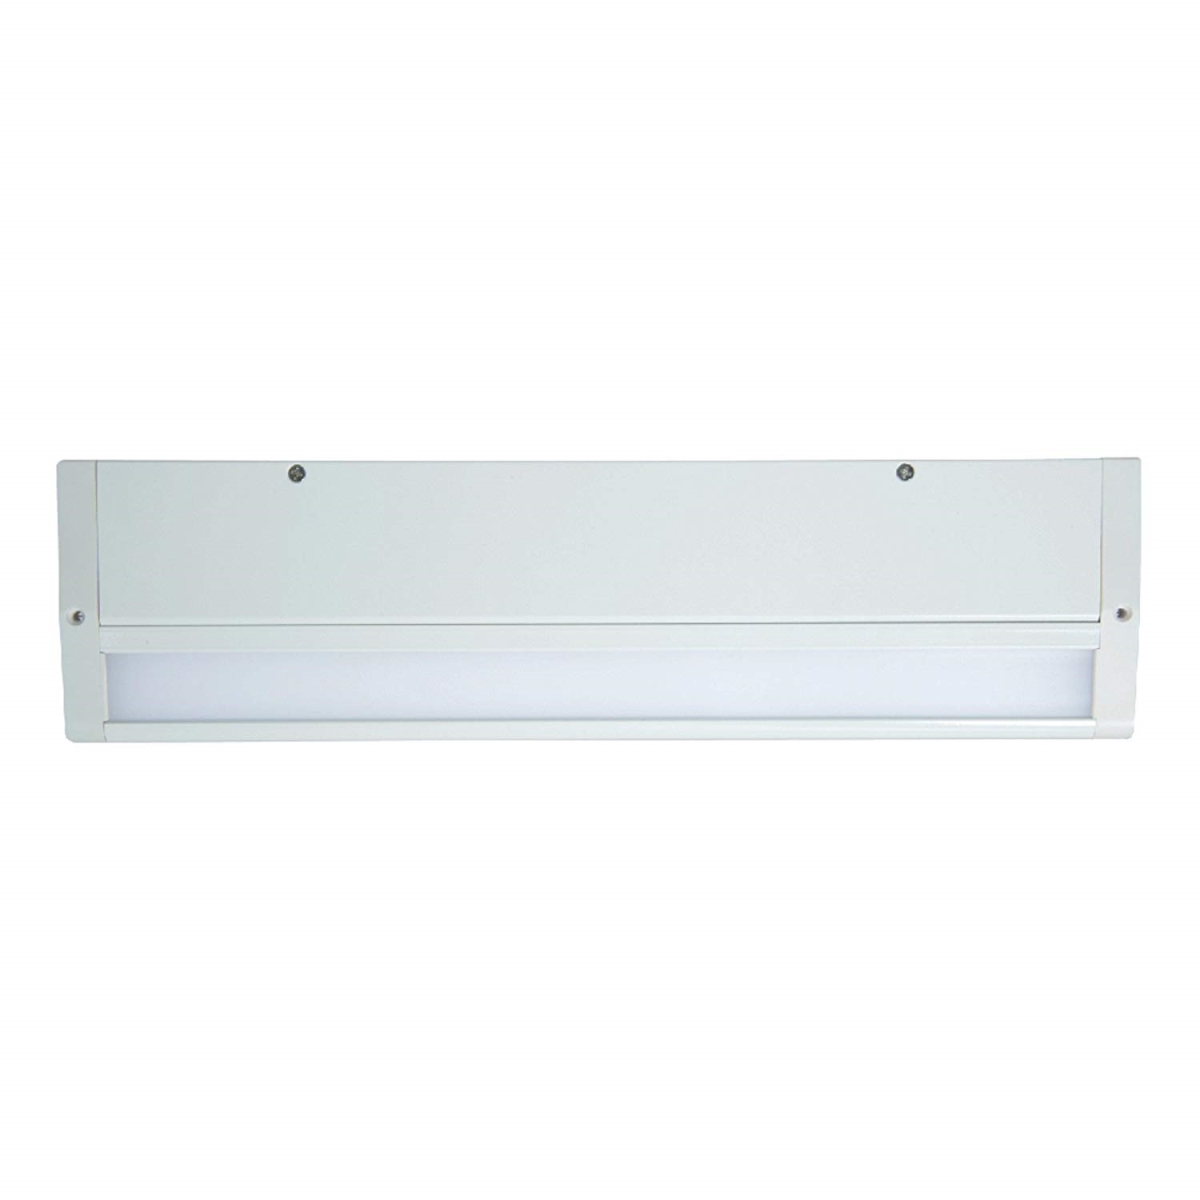 Hu1009d930p Halo Hu10 Led Undercabinet, White - 9 In.